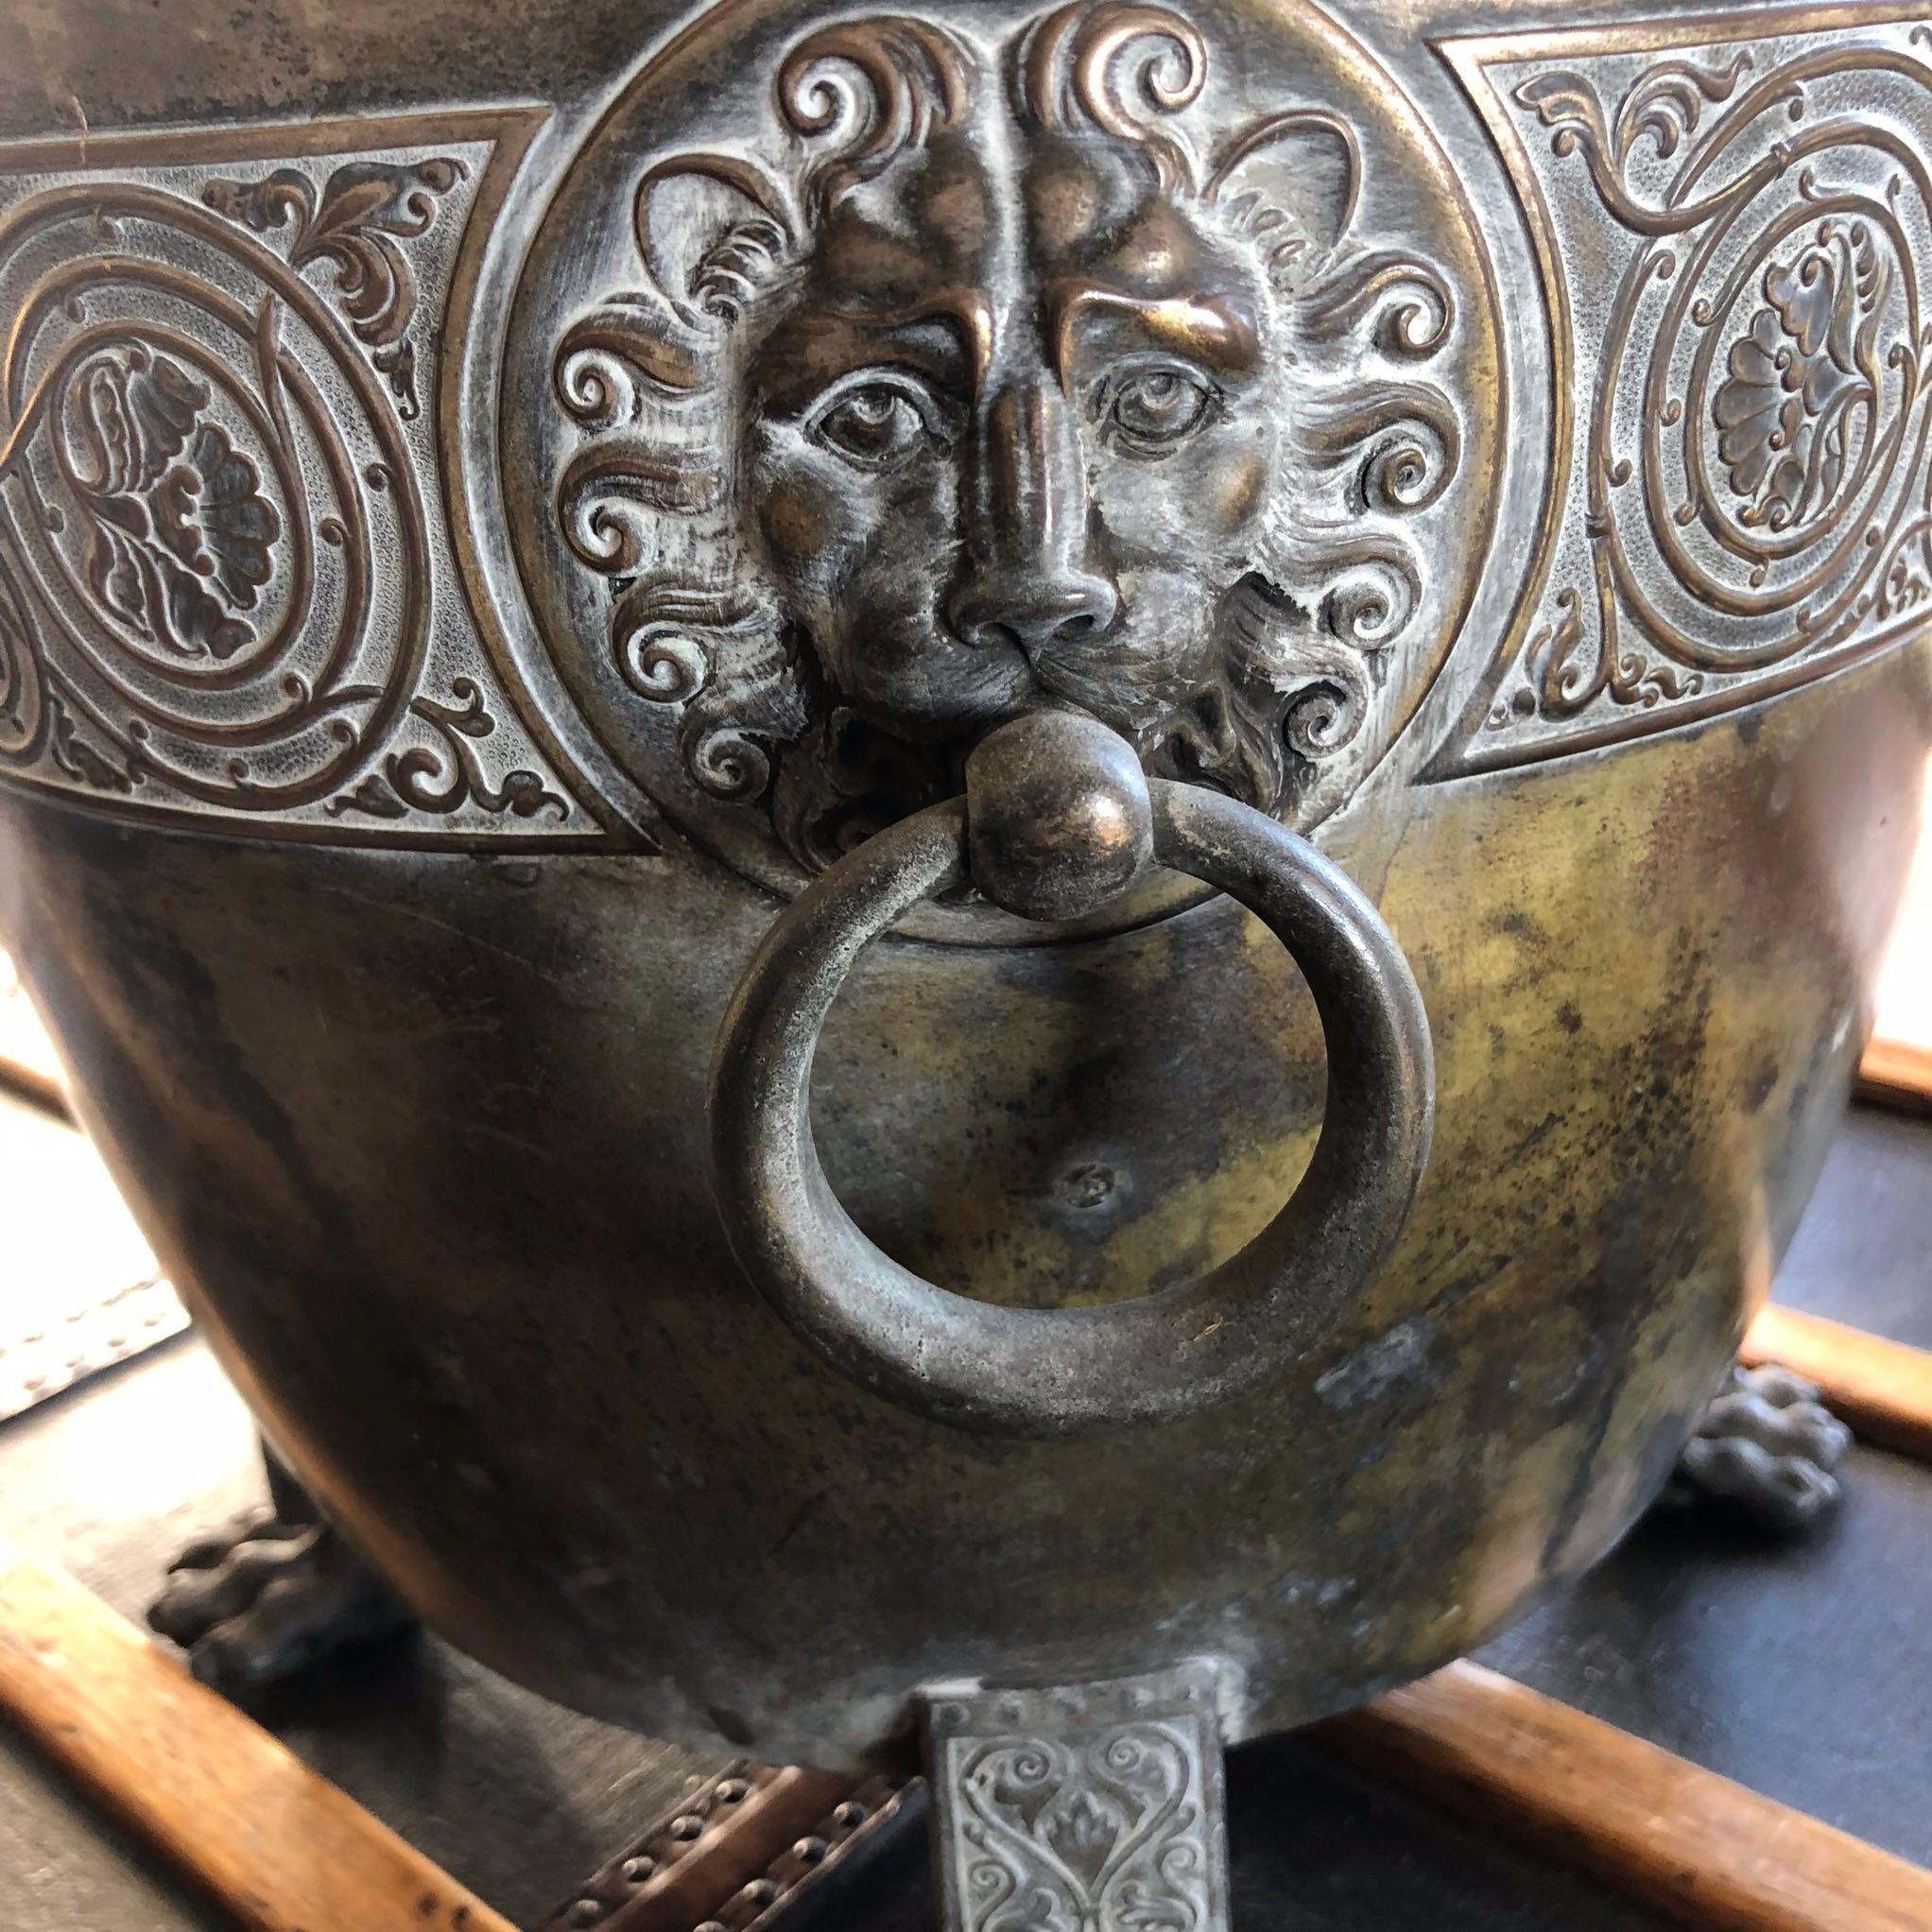 A brass pot/planter with decorative lion carvings on paw feet.